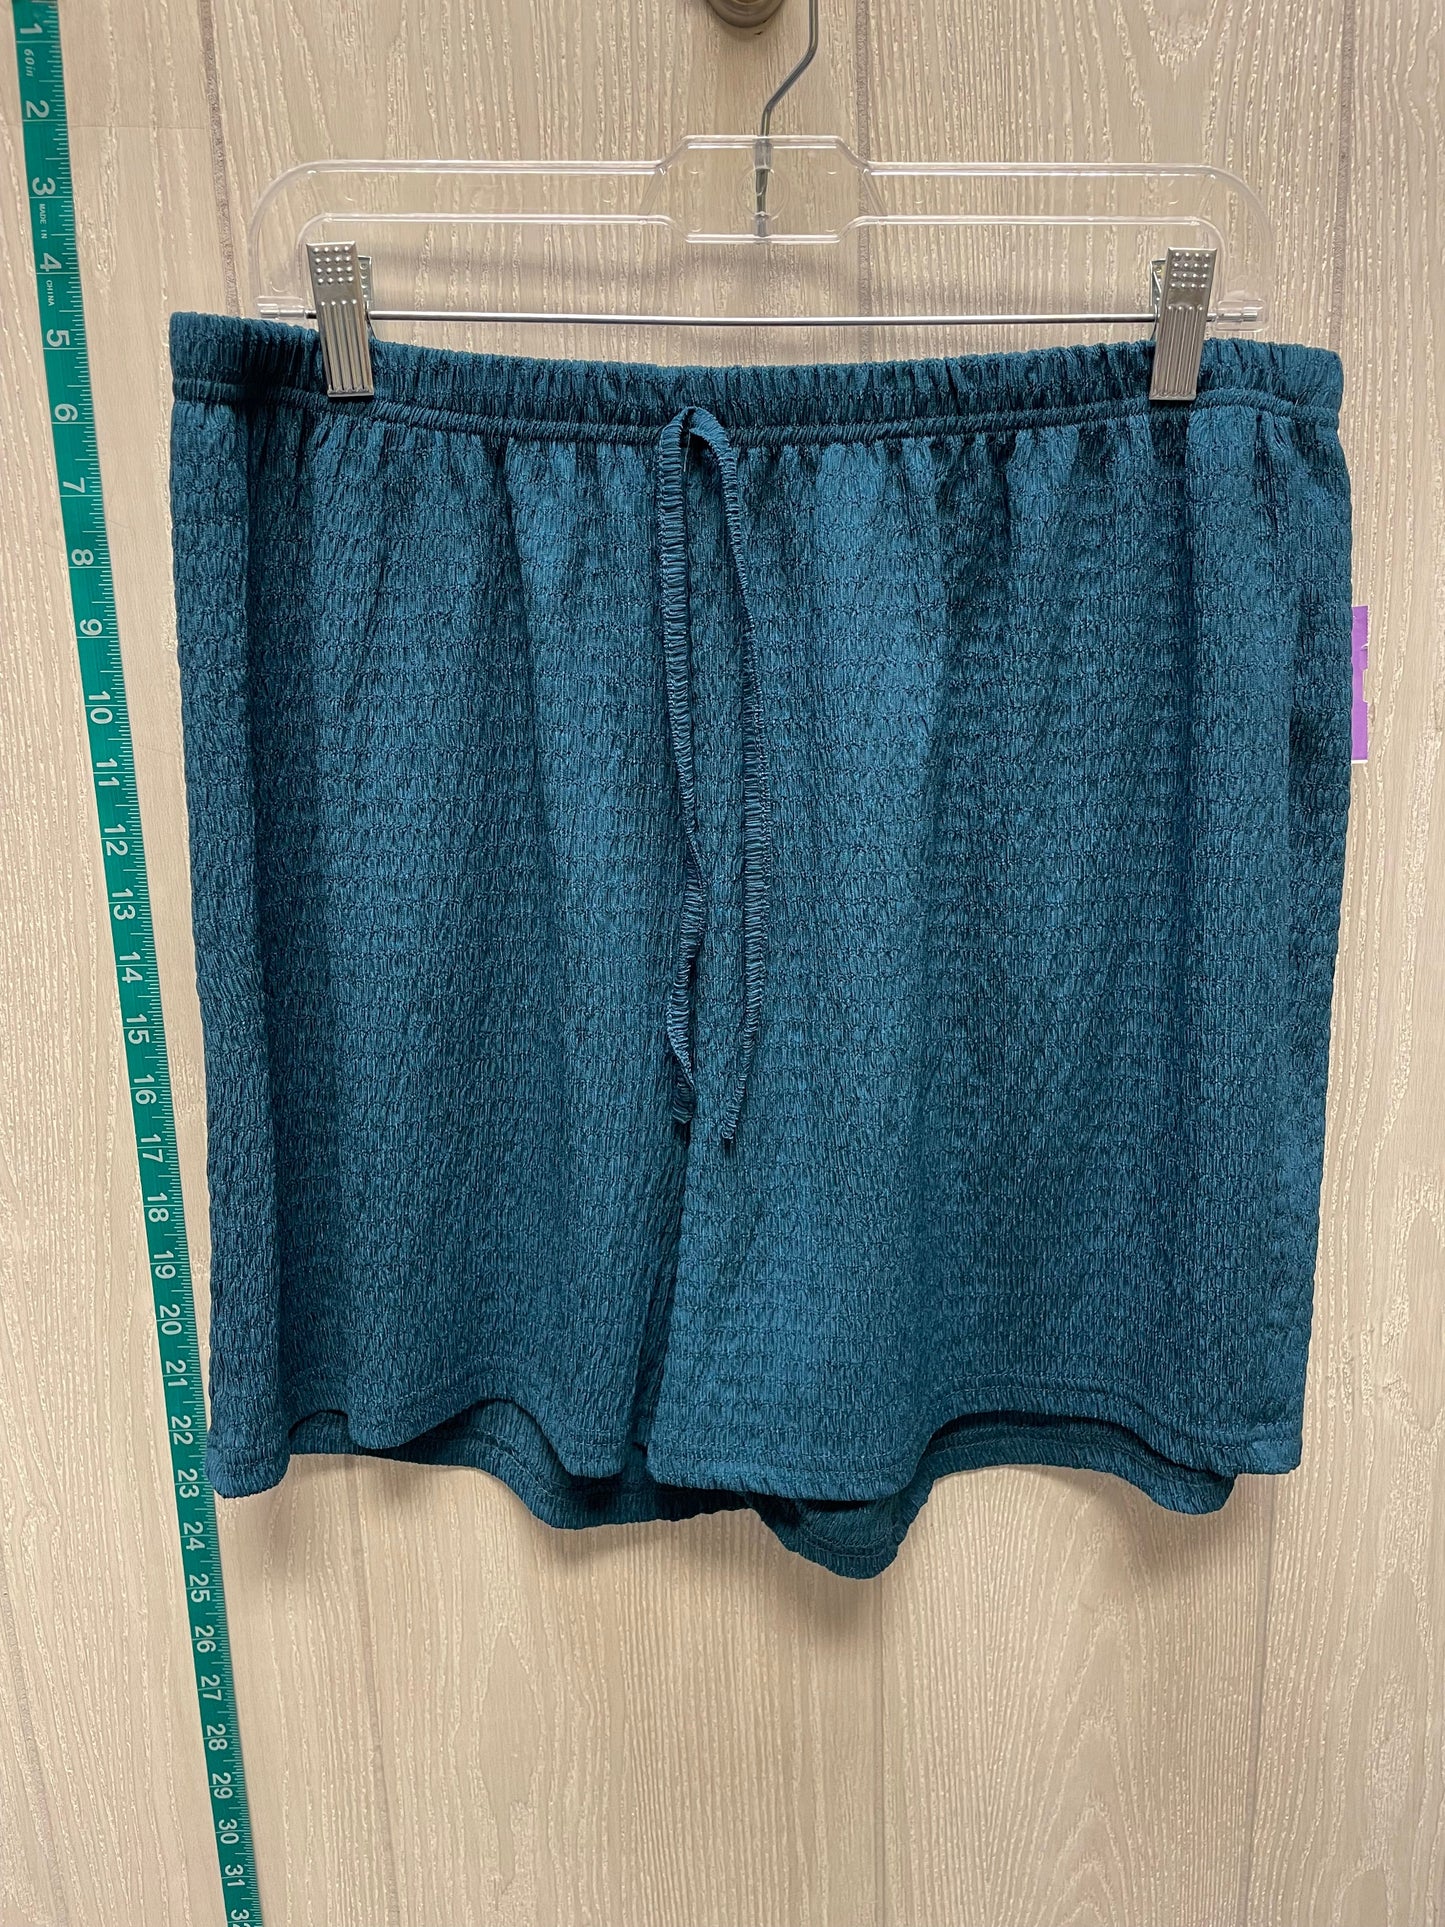 Teal Shorts Cme, Size 20